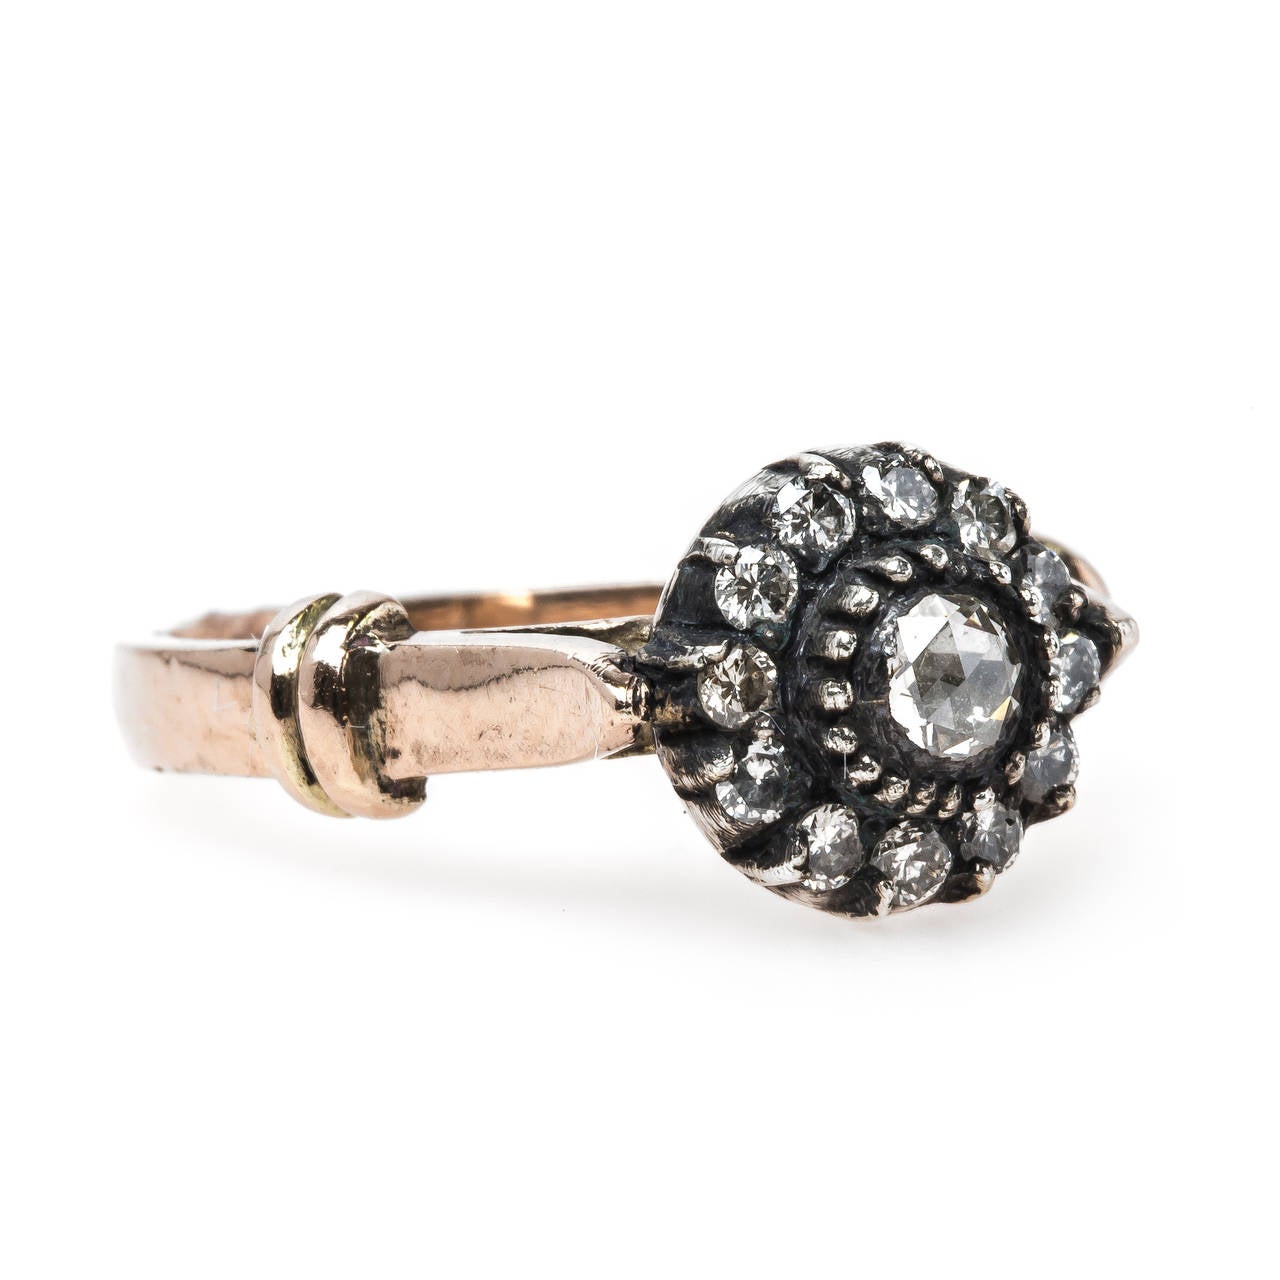 Bairnsdale is a unique yet timeless ring that draws its inspiration straight from the Victorian era. The silver topped 14k rose gold ring centers a single Rose Cut diamond surrounded by a glittering halo of twelve Round Brilliant Cut diamonds